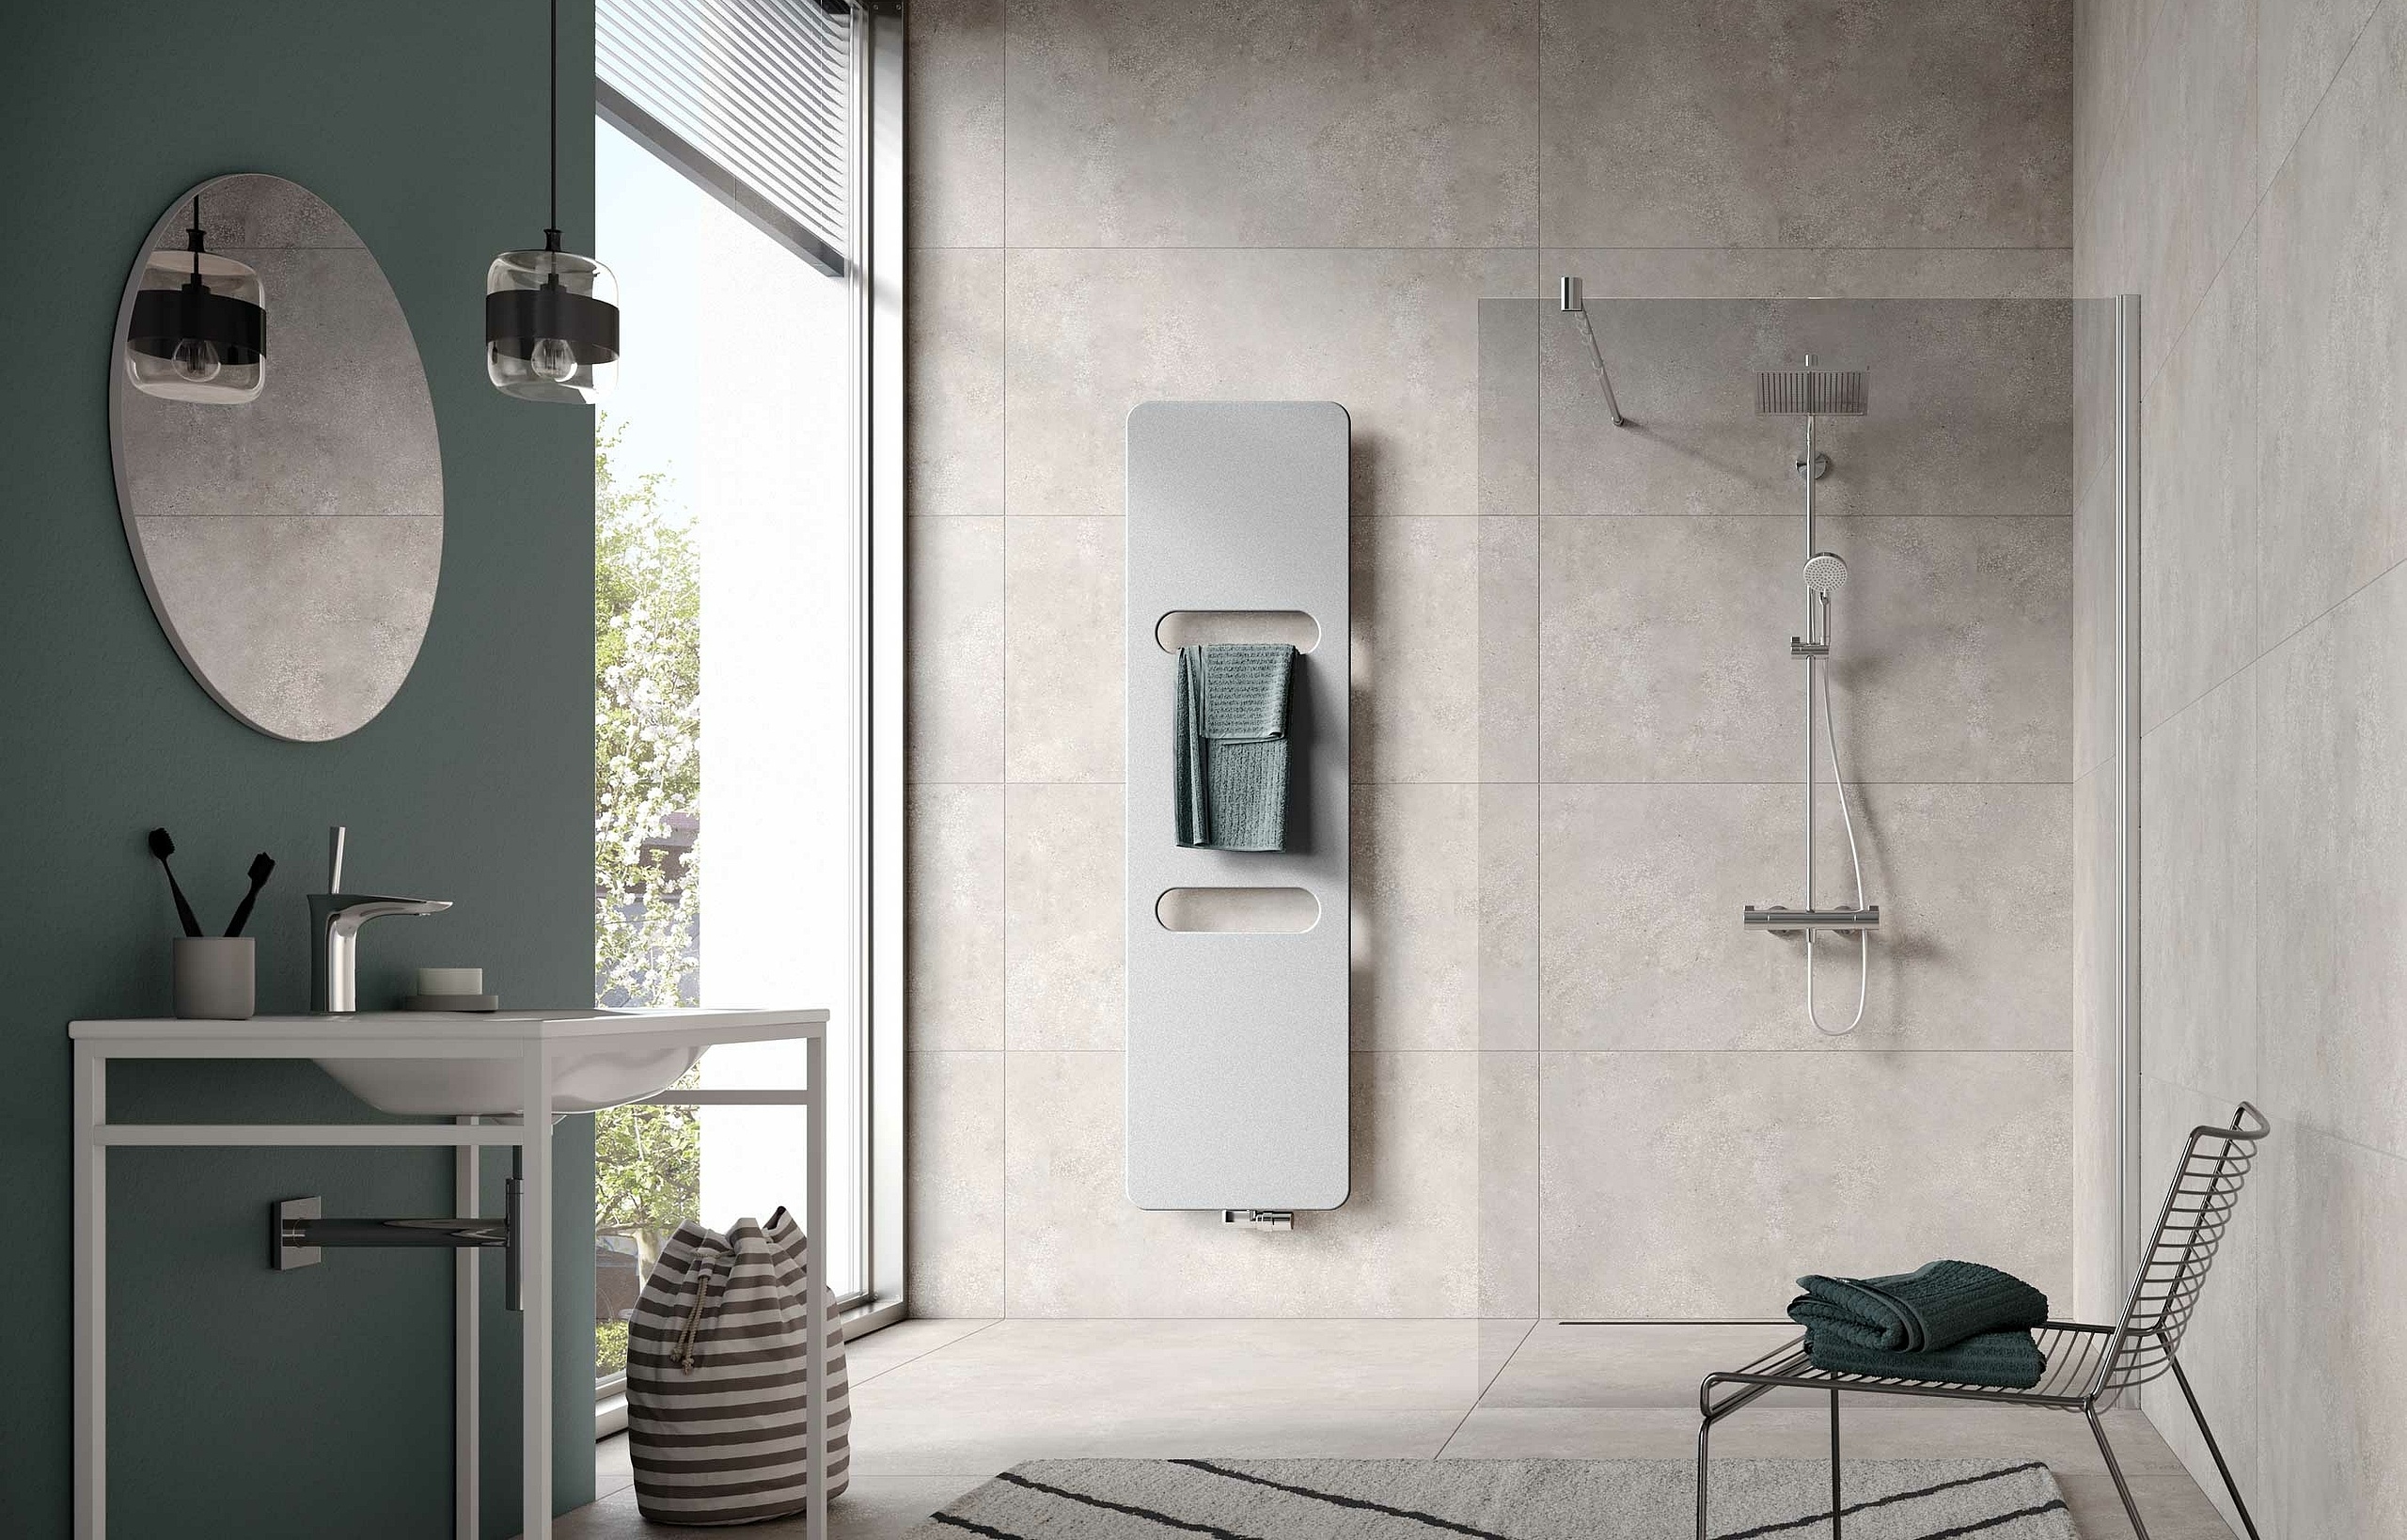 With two rounded recesses, the Fineo design and bathroom radiator from Kermi gets towels or clothes lovely and warm in no time.